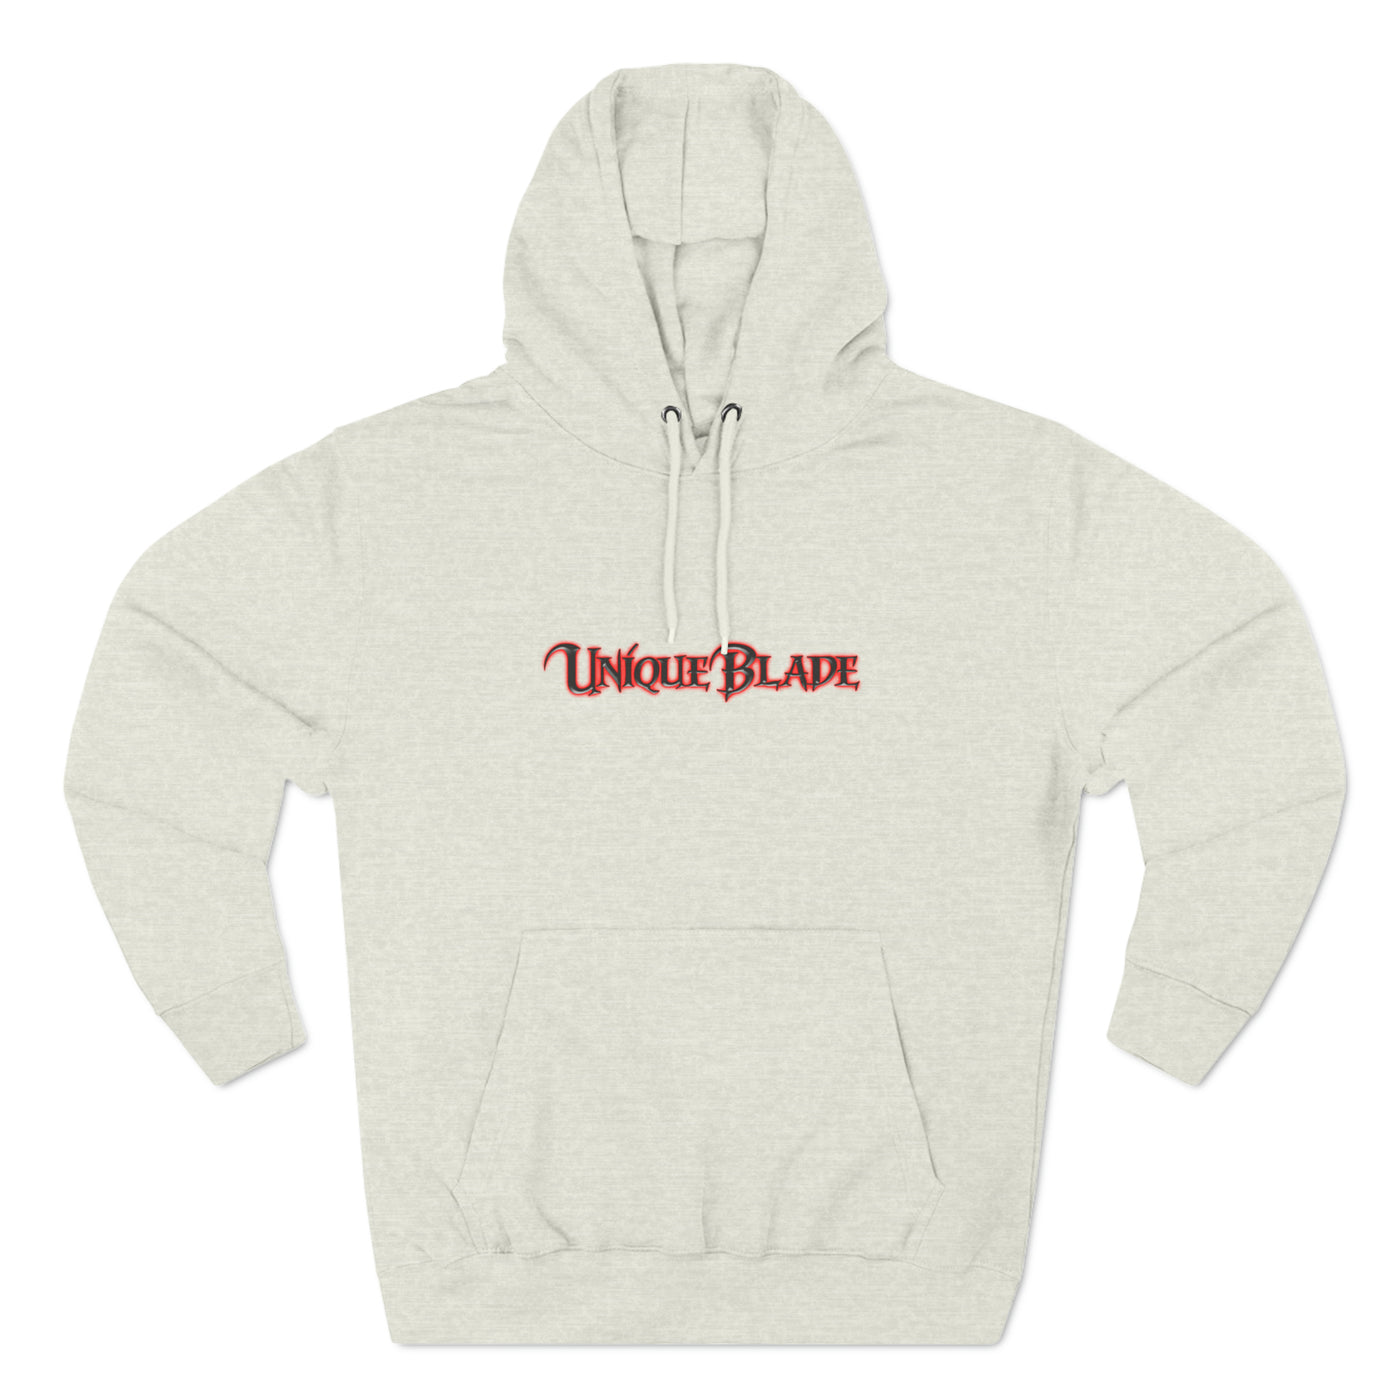 Unisex Premium Pullover Hoodie - High-quality and versatile hoodie suitable for both men and women, offering comfort and style for various occasions.